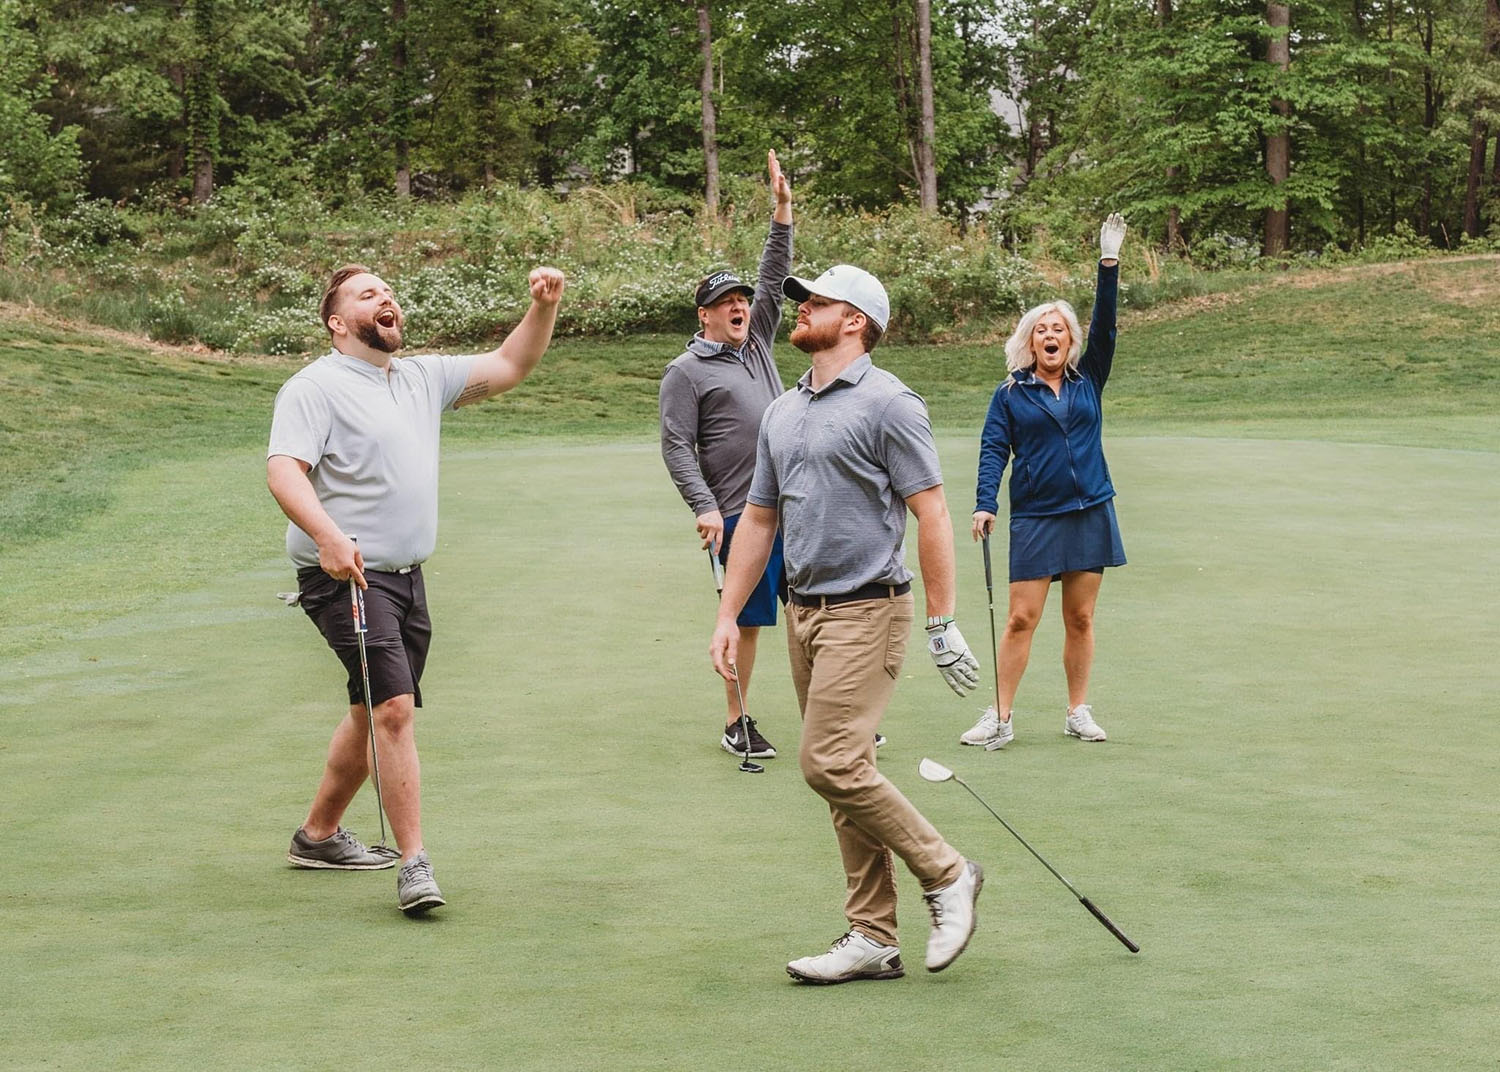 coworkers having fun on golf course 